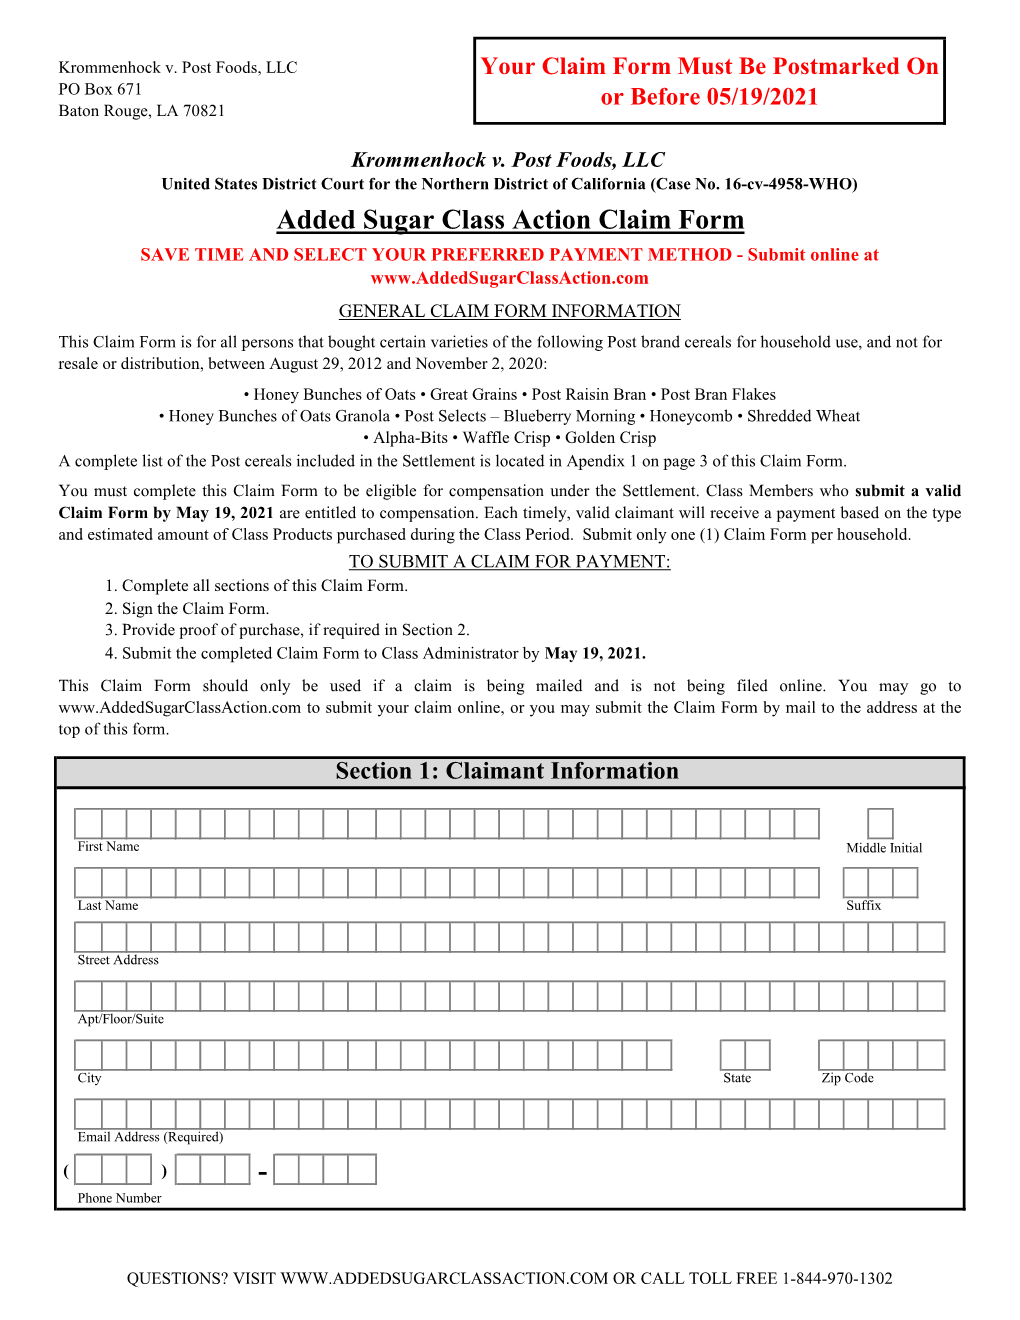 Mail-In Claim Form